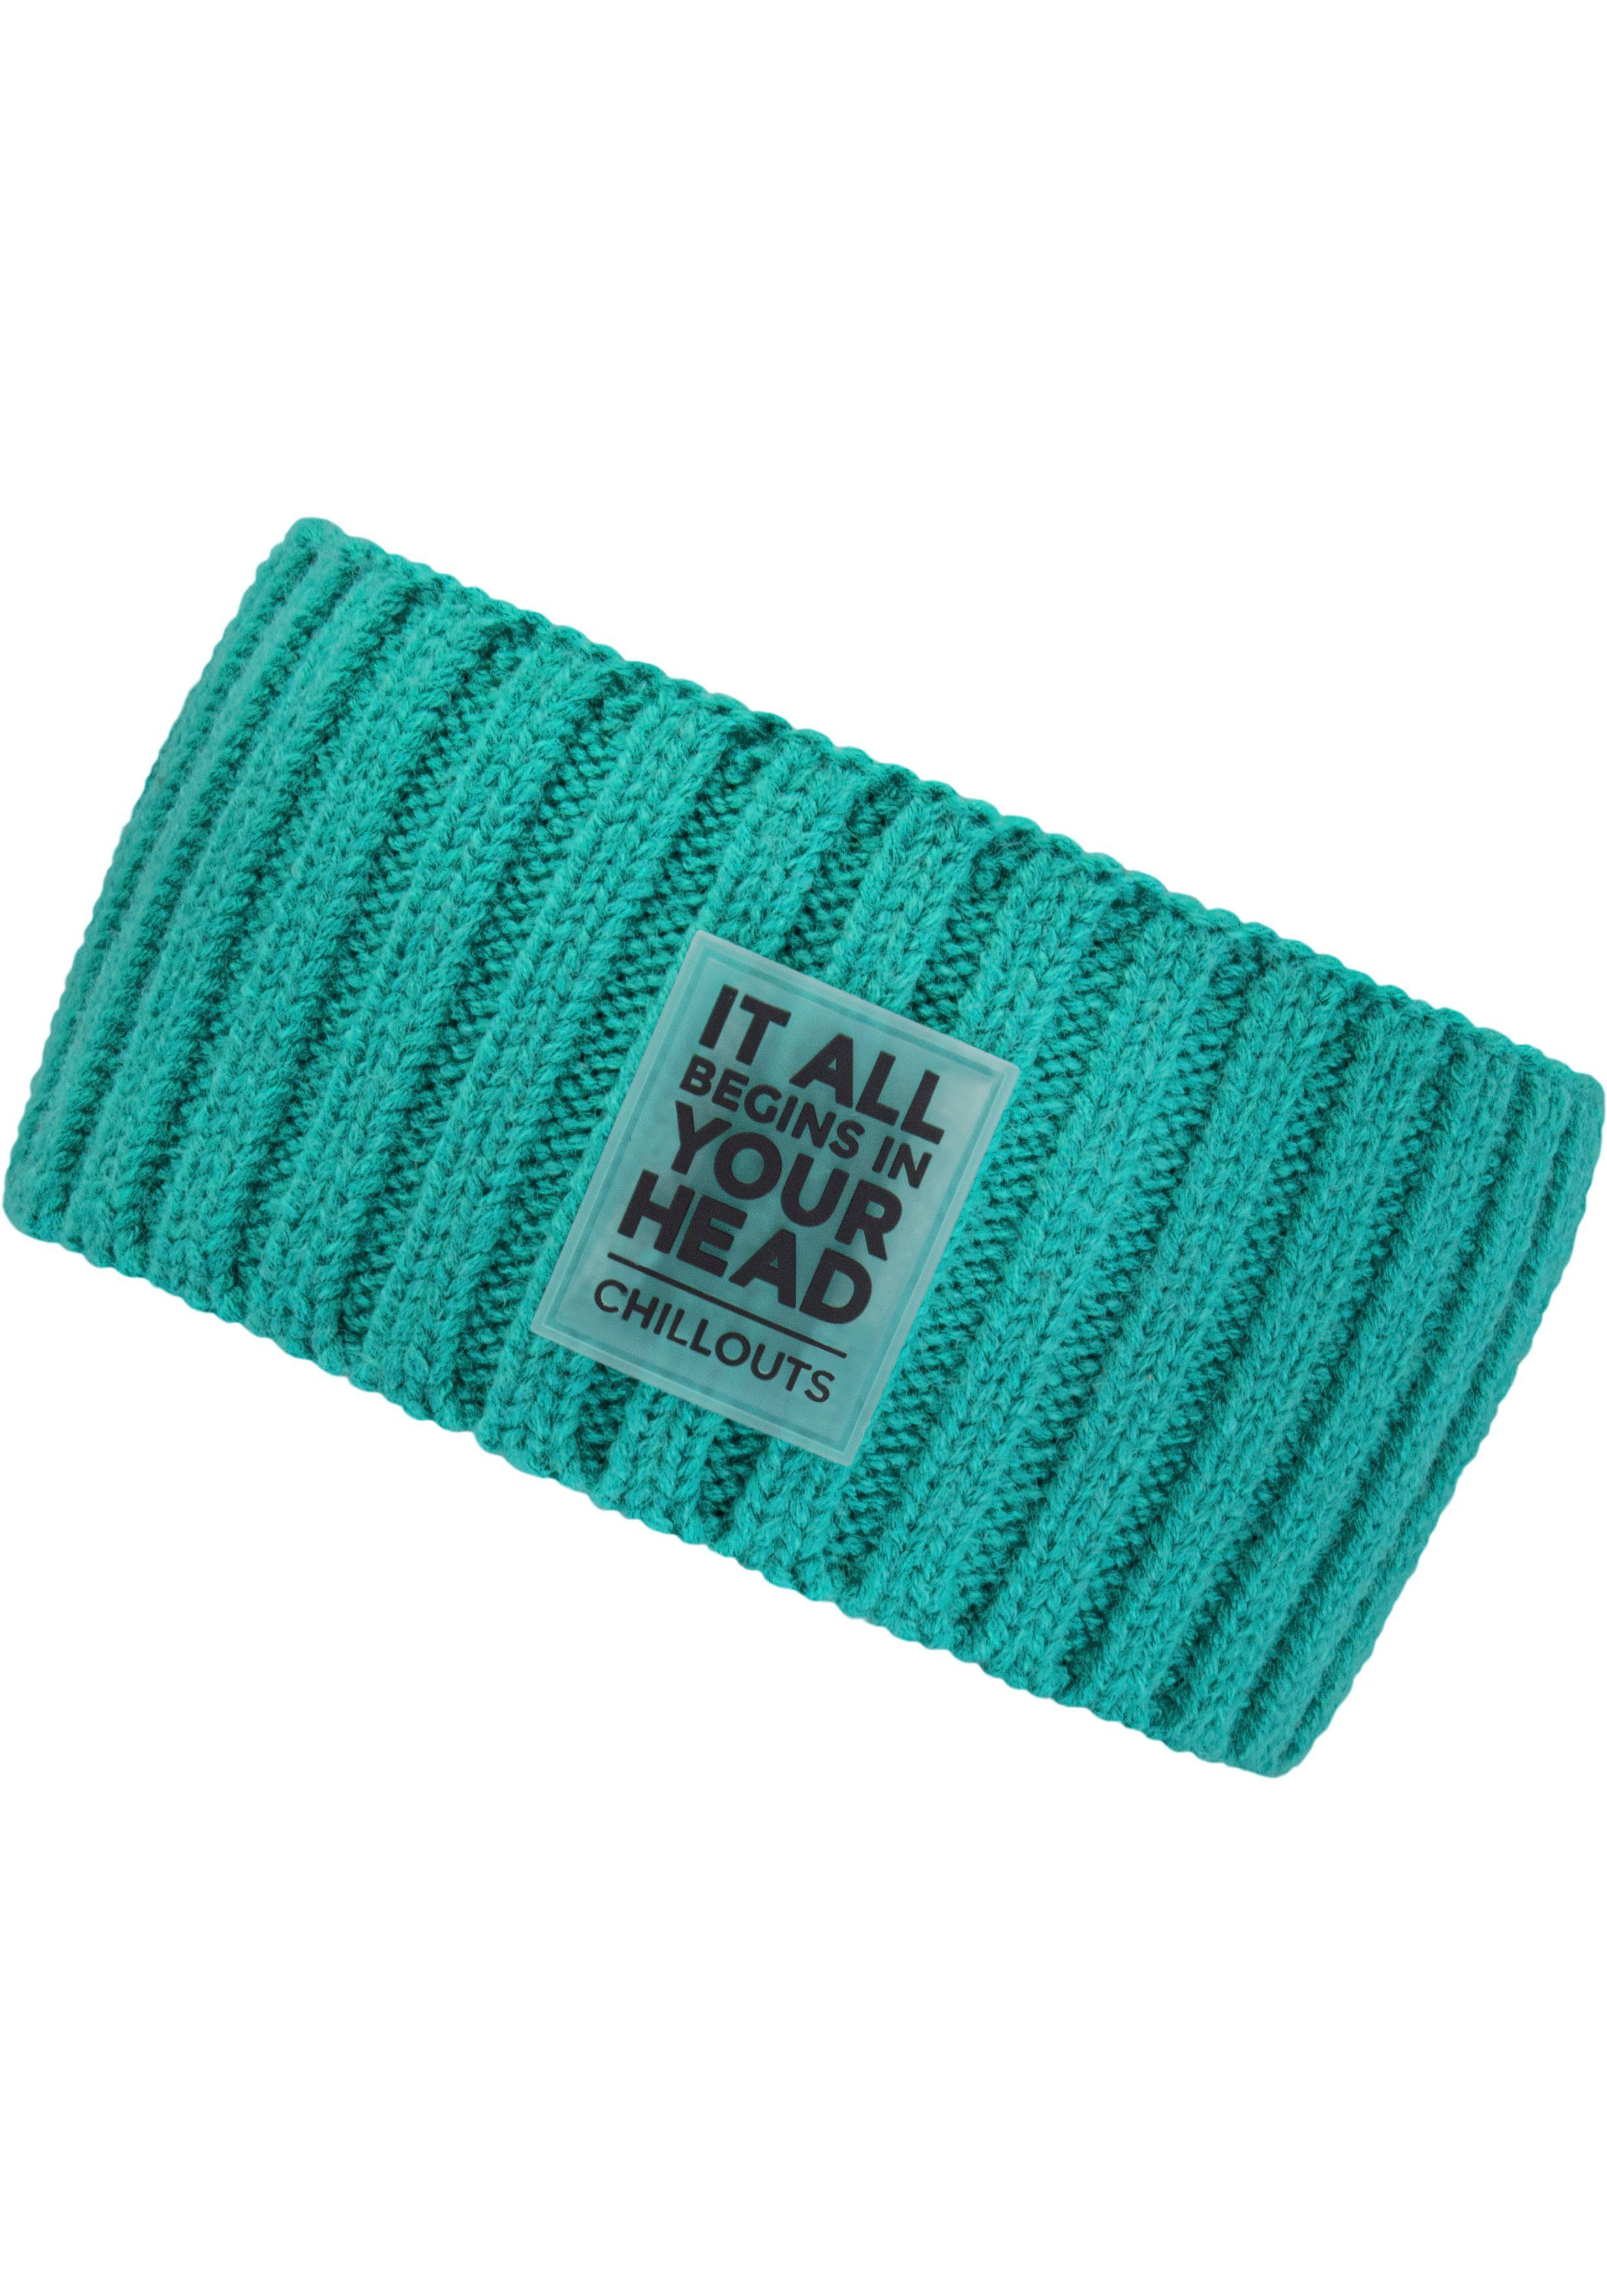 Design Headband turquoise chillouts Stirnband Zoe Trendiges